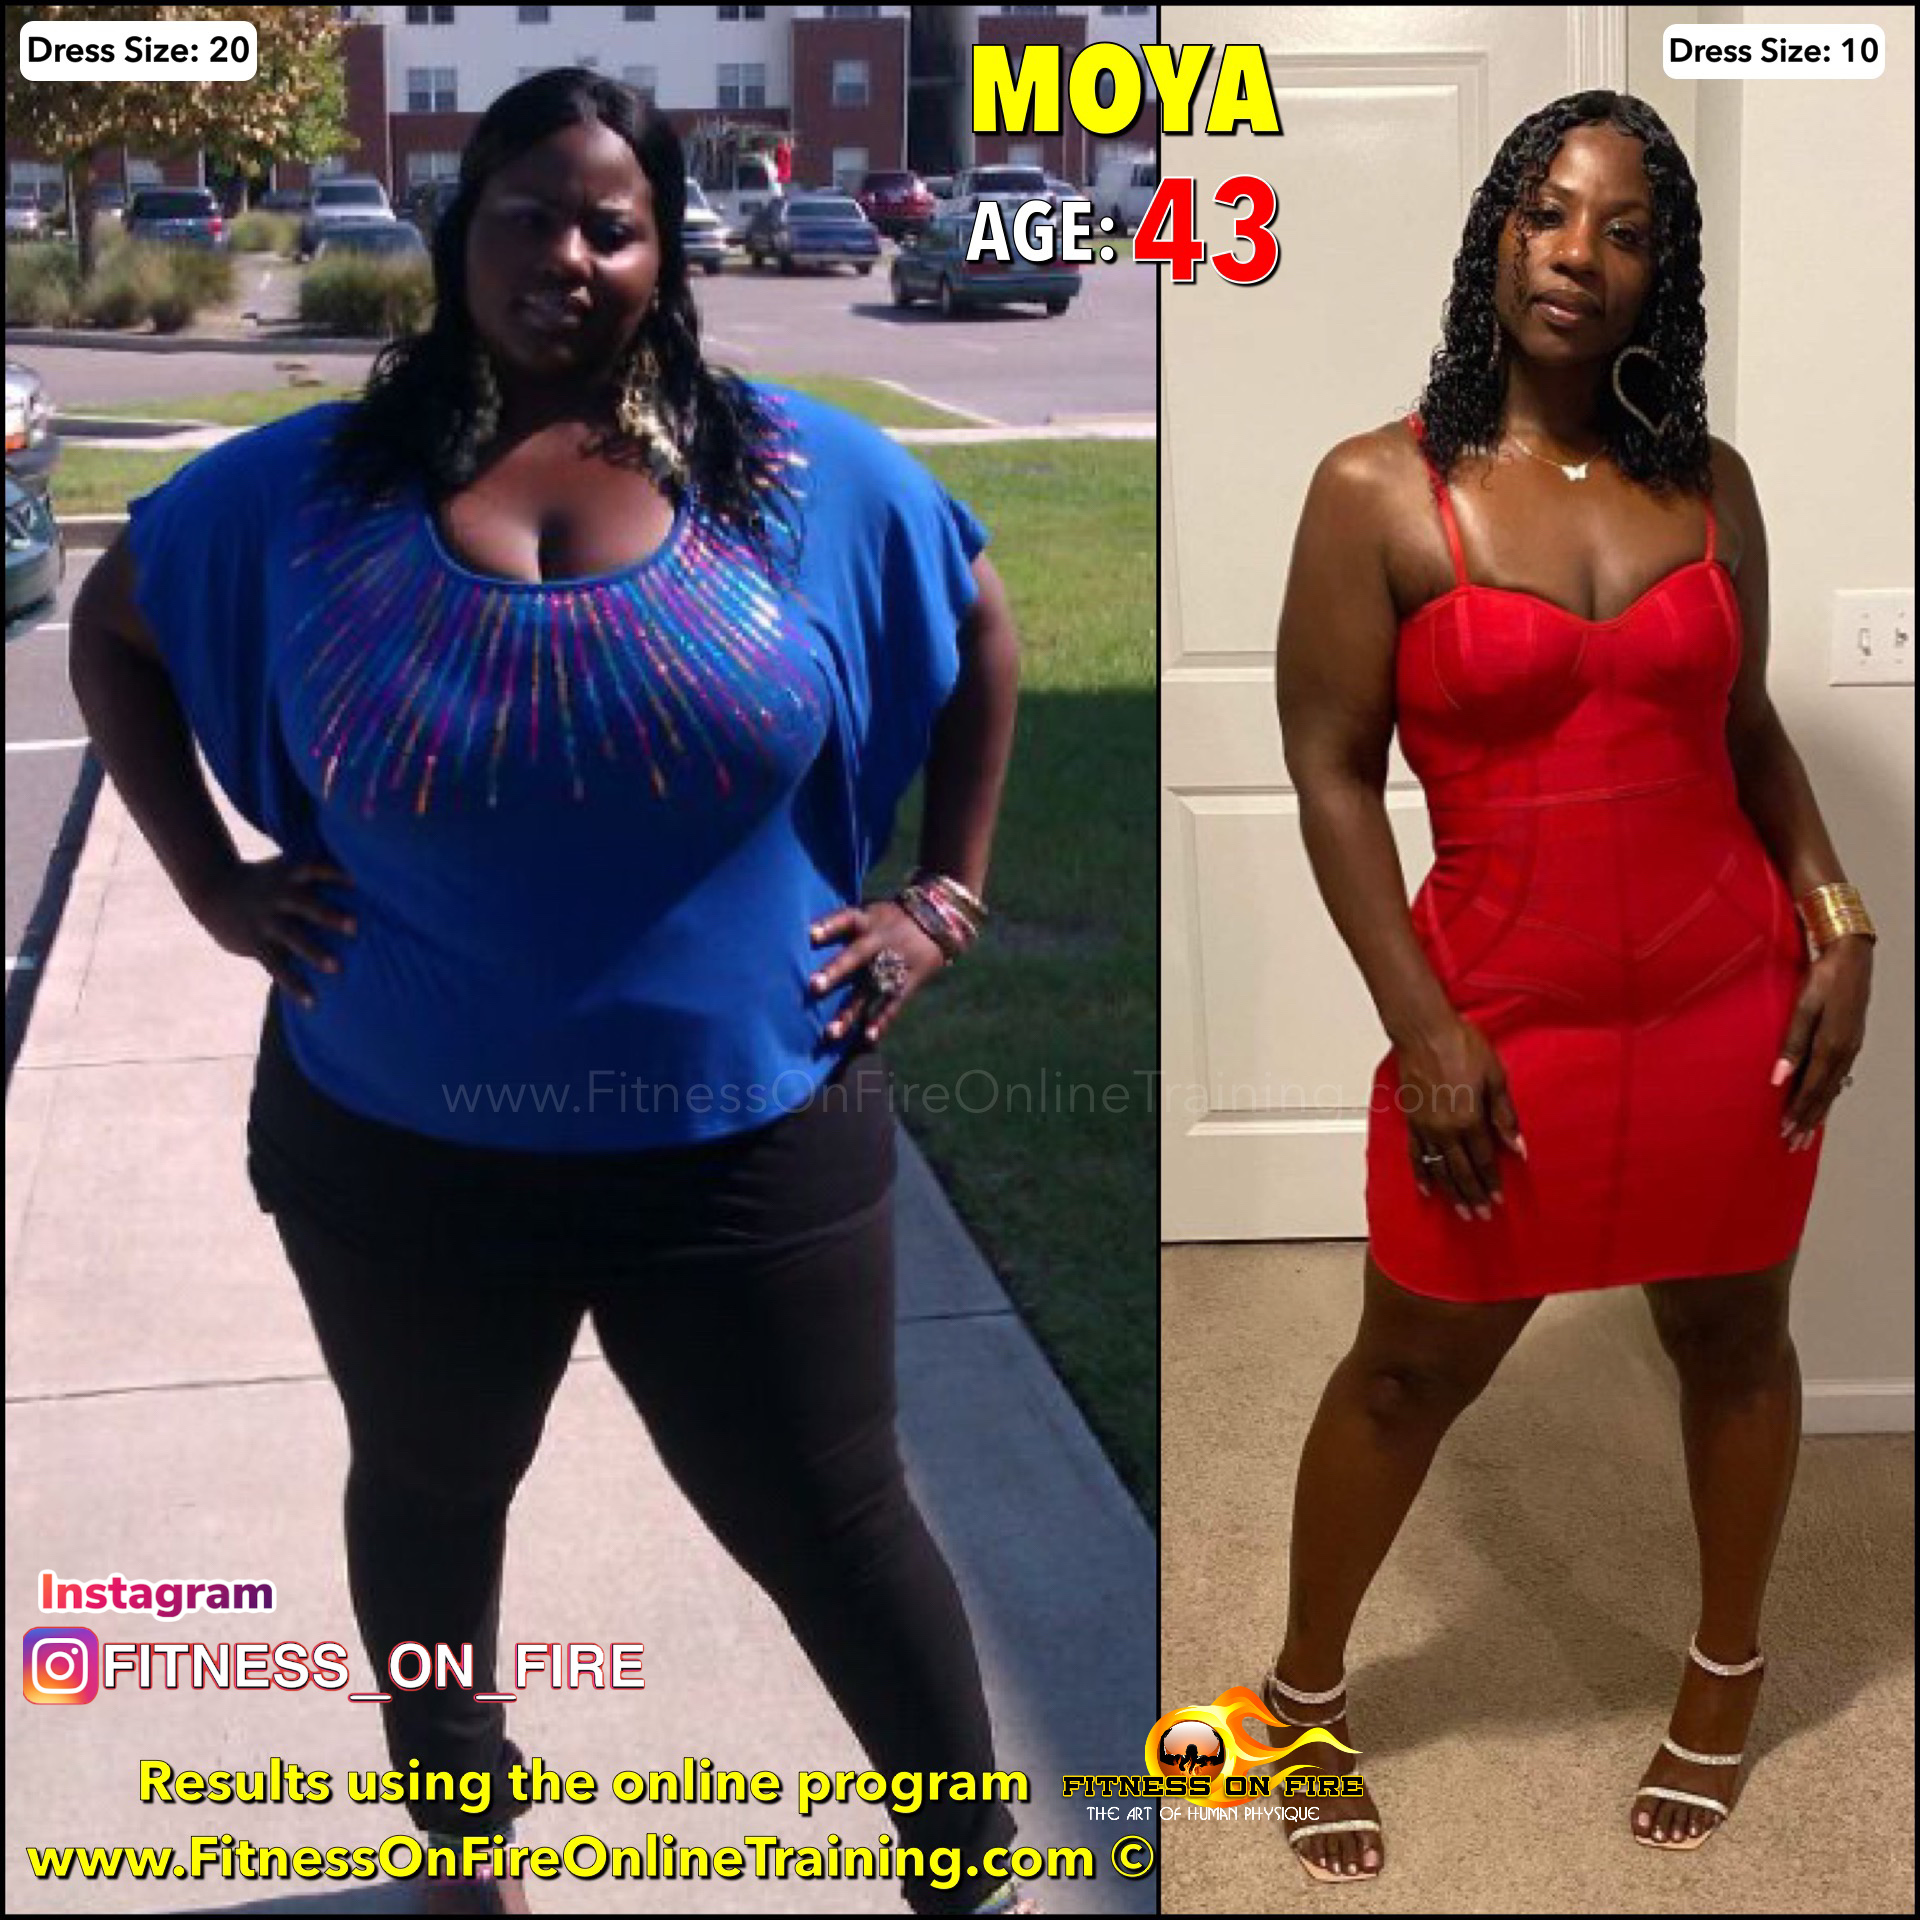 Moya, a 43-year-old woman, achieved an amazing body transformation using  the Fitness on Fire online training program. - Fitness On Fire Online  Training